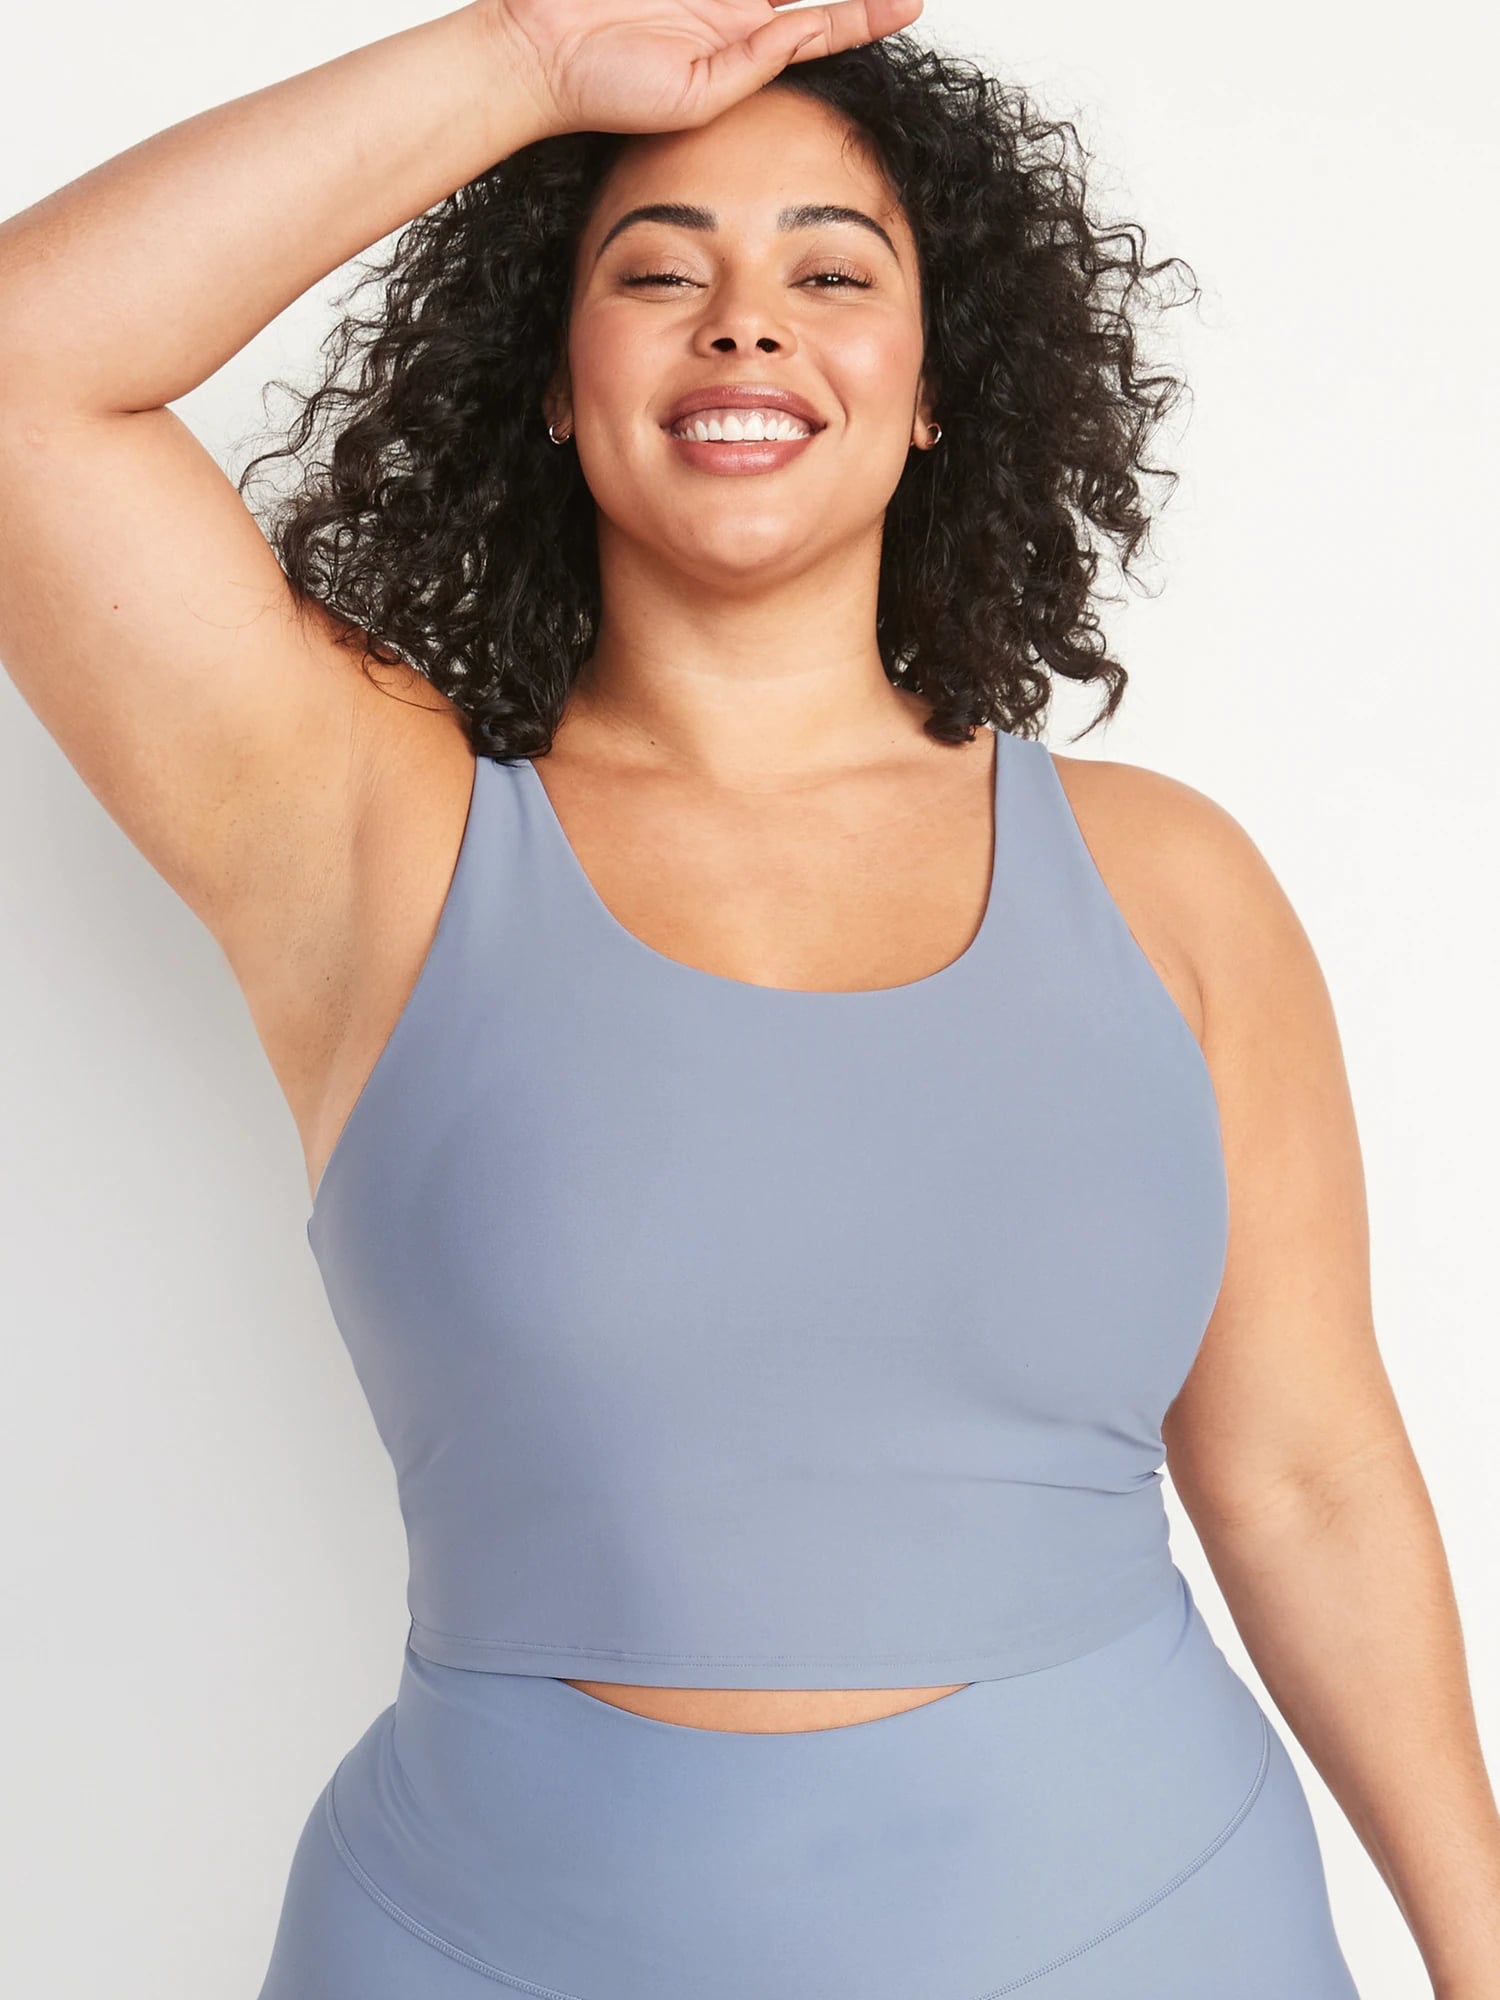 THE BIGGEST & BEST FABLETICS HAUL I'VE EVER DONE  Huge Plus Size Fabletics  Try-On Summer Haul 